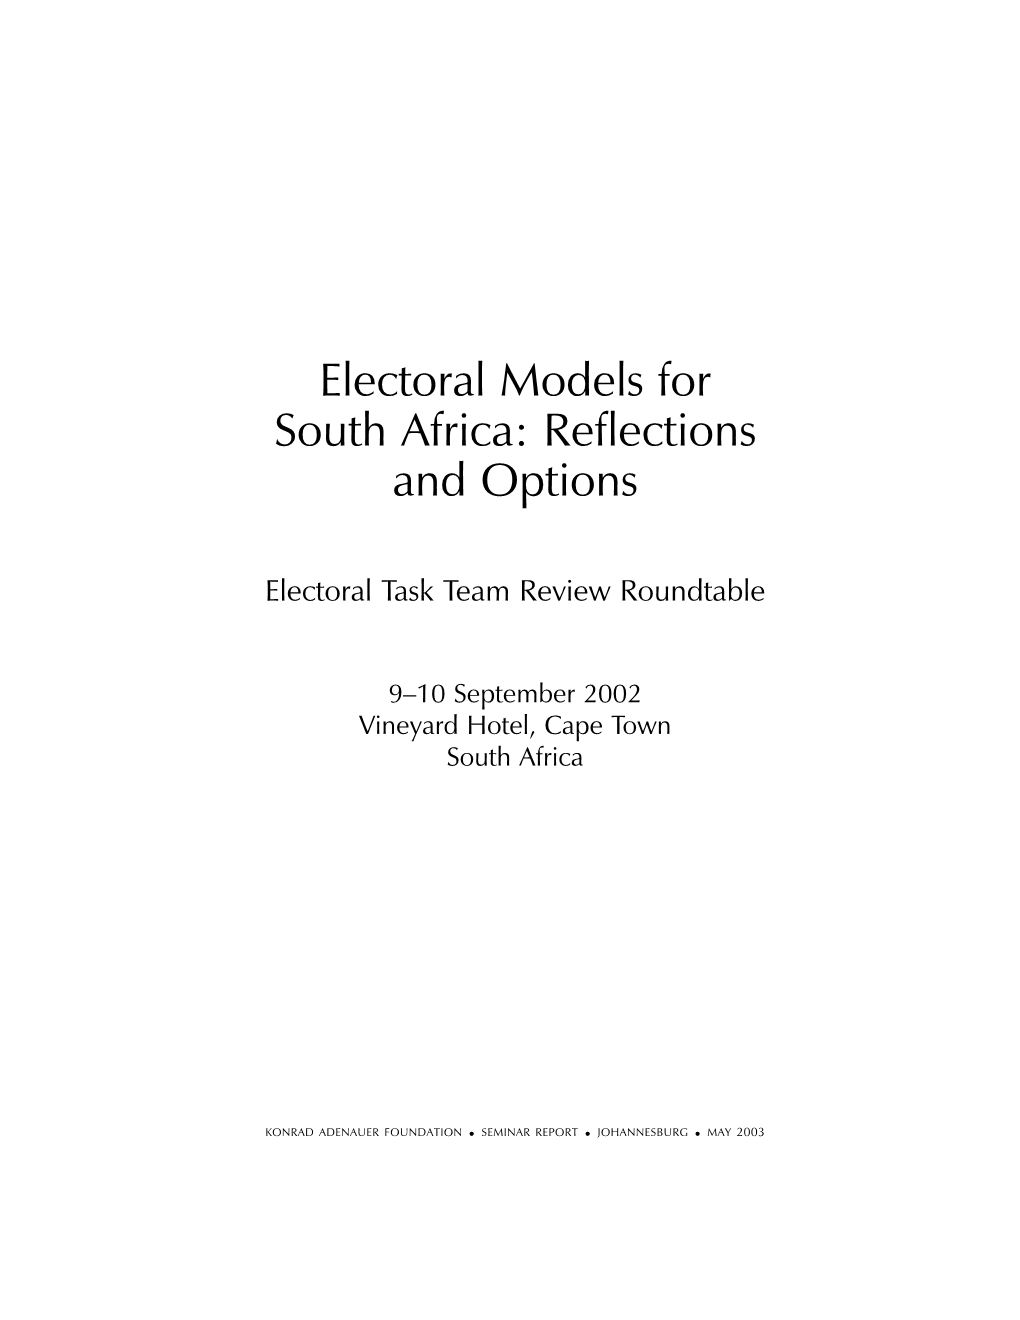 Electoral Models for South Africa: Reflections and Options